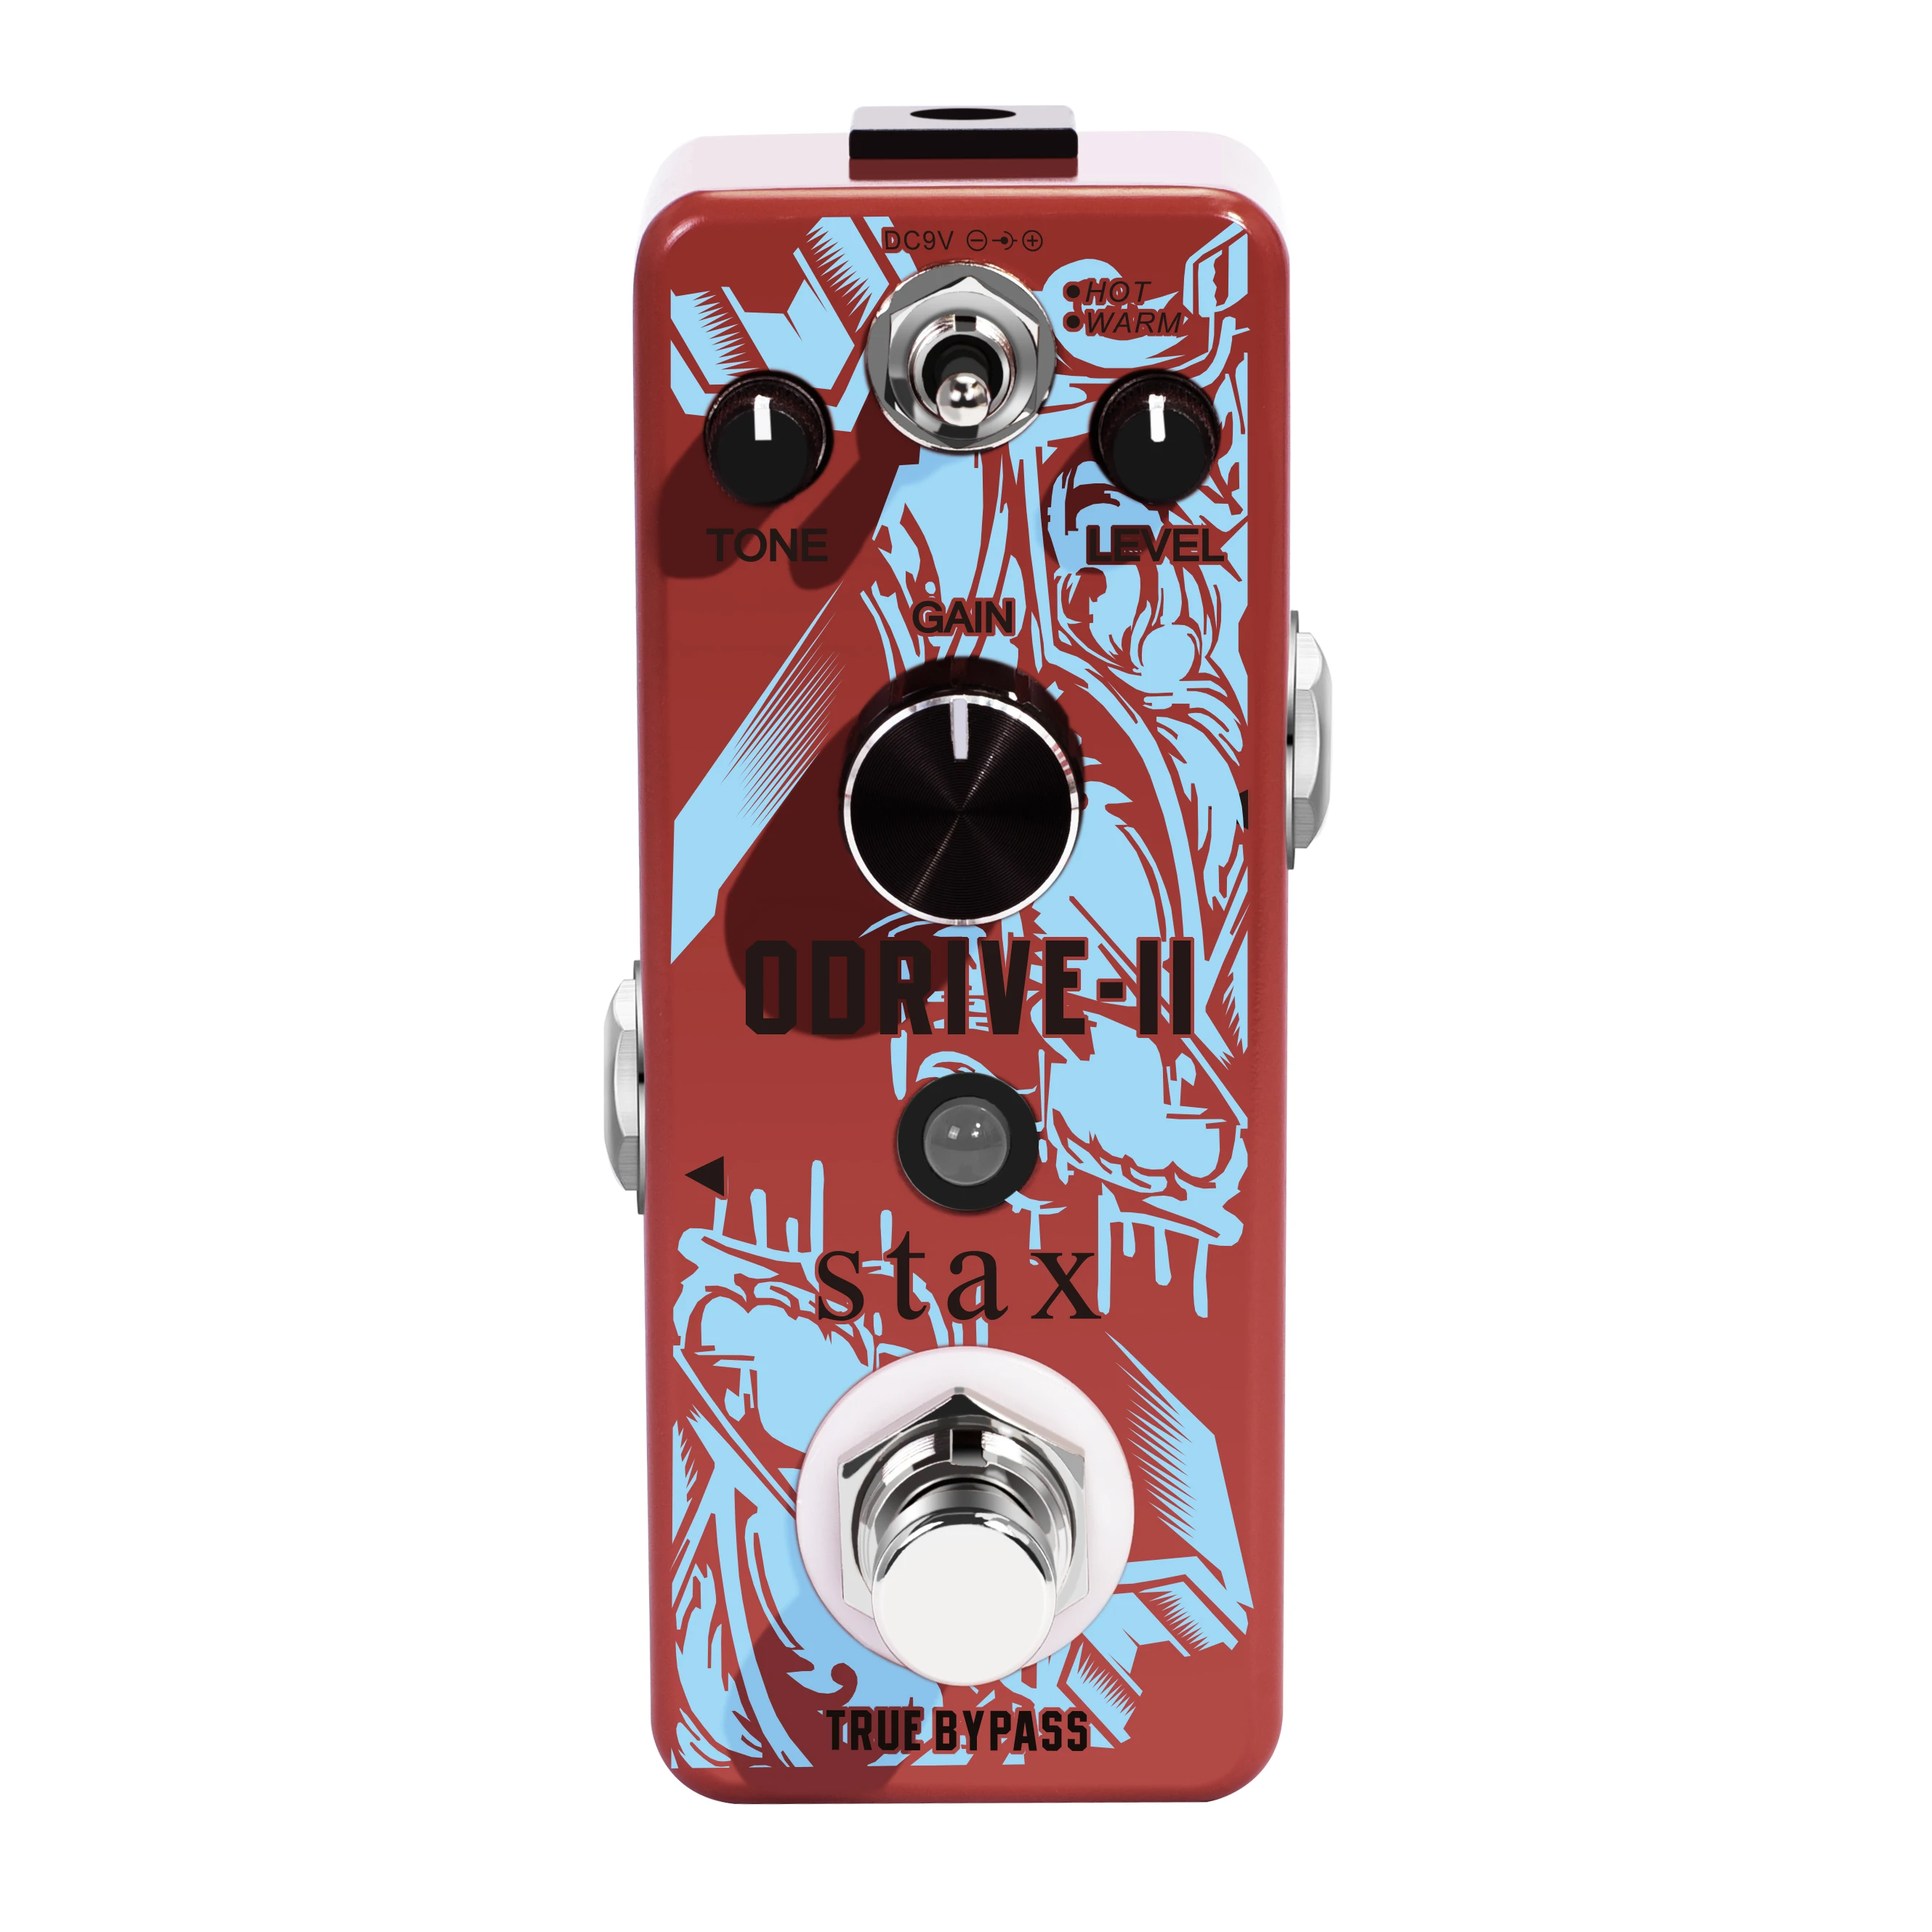 Stax LEF-302B ODRIVE-II Classical Electronic Overdrive Guitar Effect Pedal True Bypass2 Working Mode Full Metal Case movall mp 315 crazy screamer classical overdrive pedal effect hot warm modes true bypass electric guitar parts